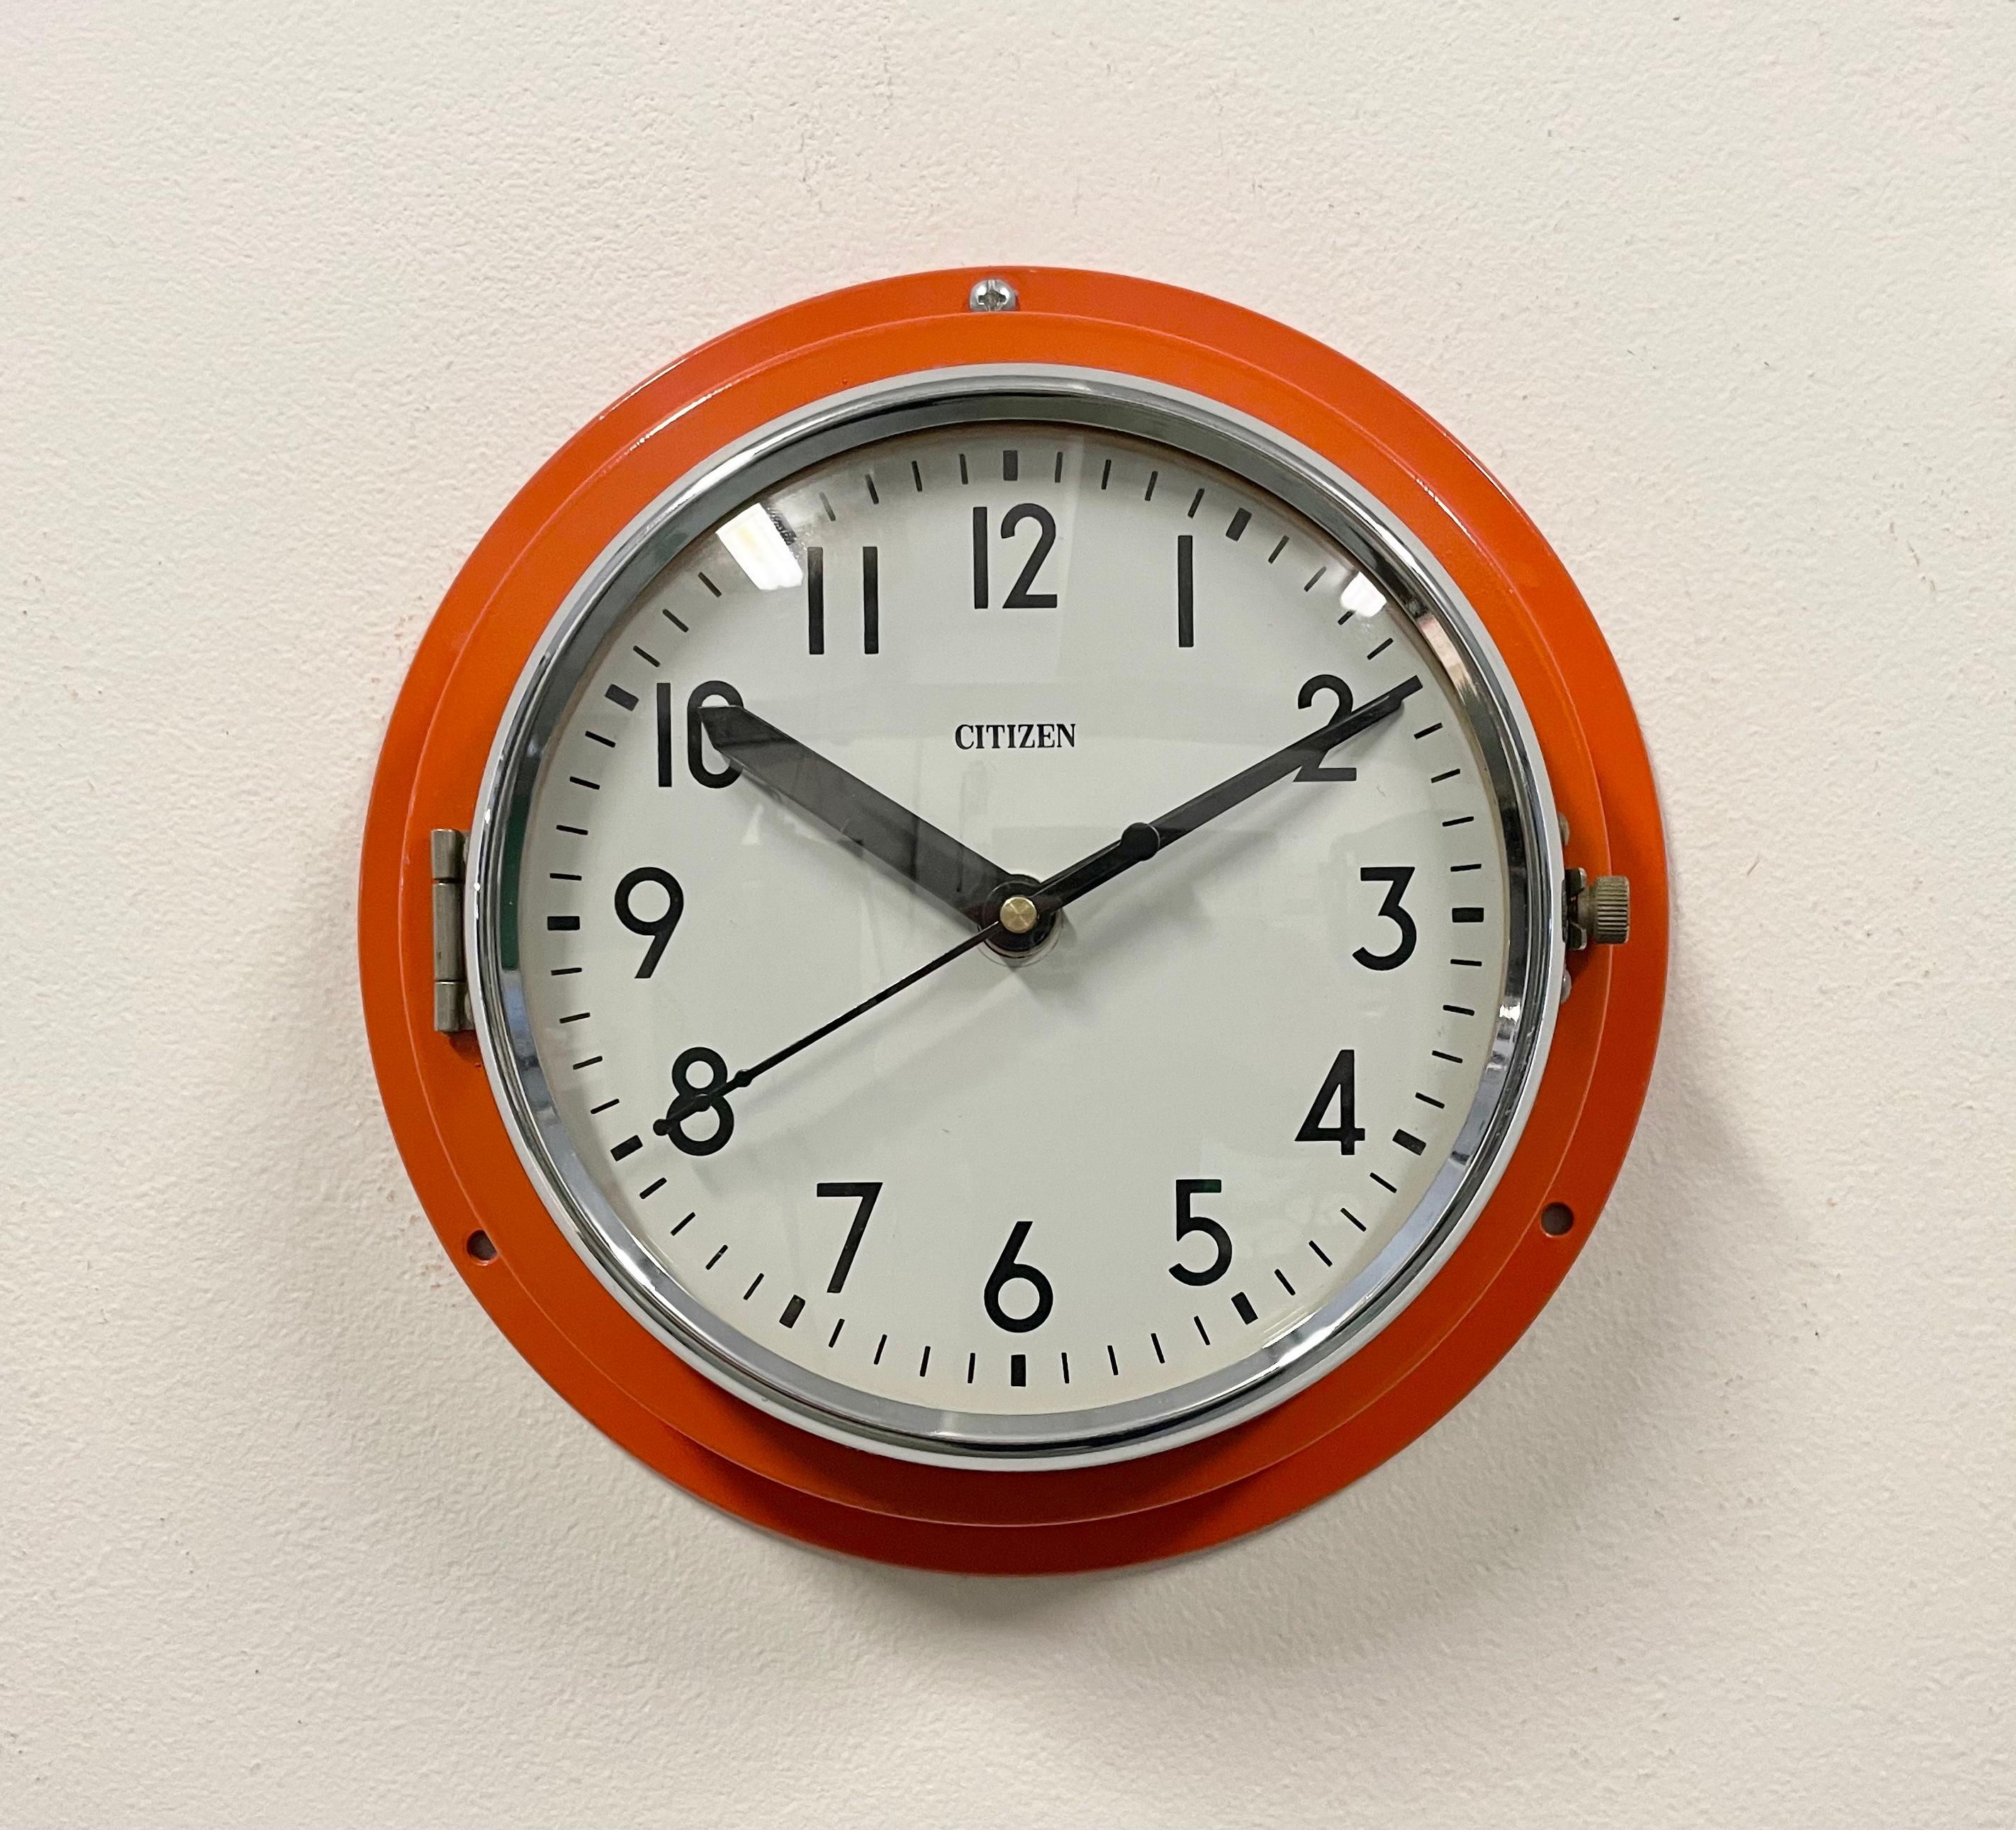 Vintage citizen navy slave clock designed during the 1970s and produced till 1990s. These clocks were used on large Japanese tankers and cargo ships. It features a orange metal frame, a plastic dial and curved clear glass cover. This item has been